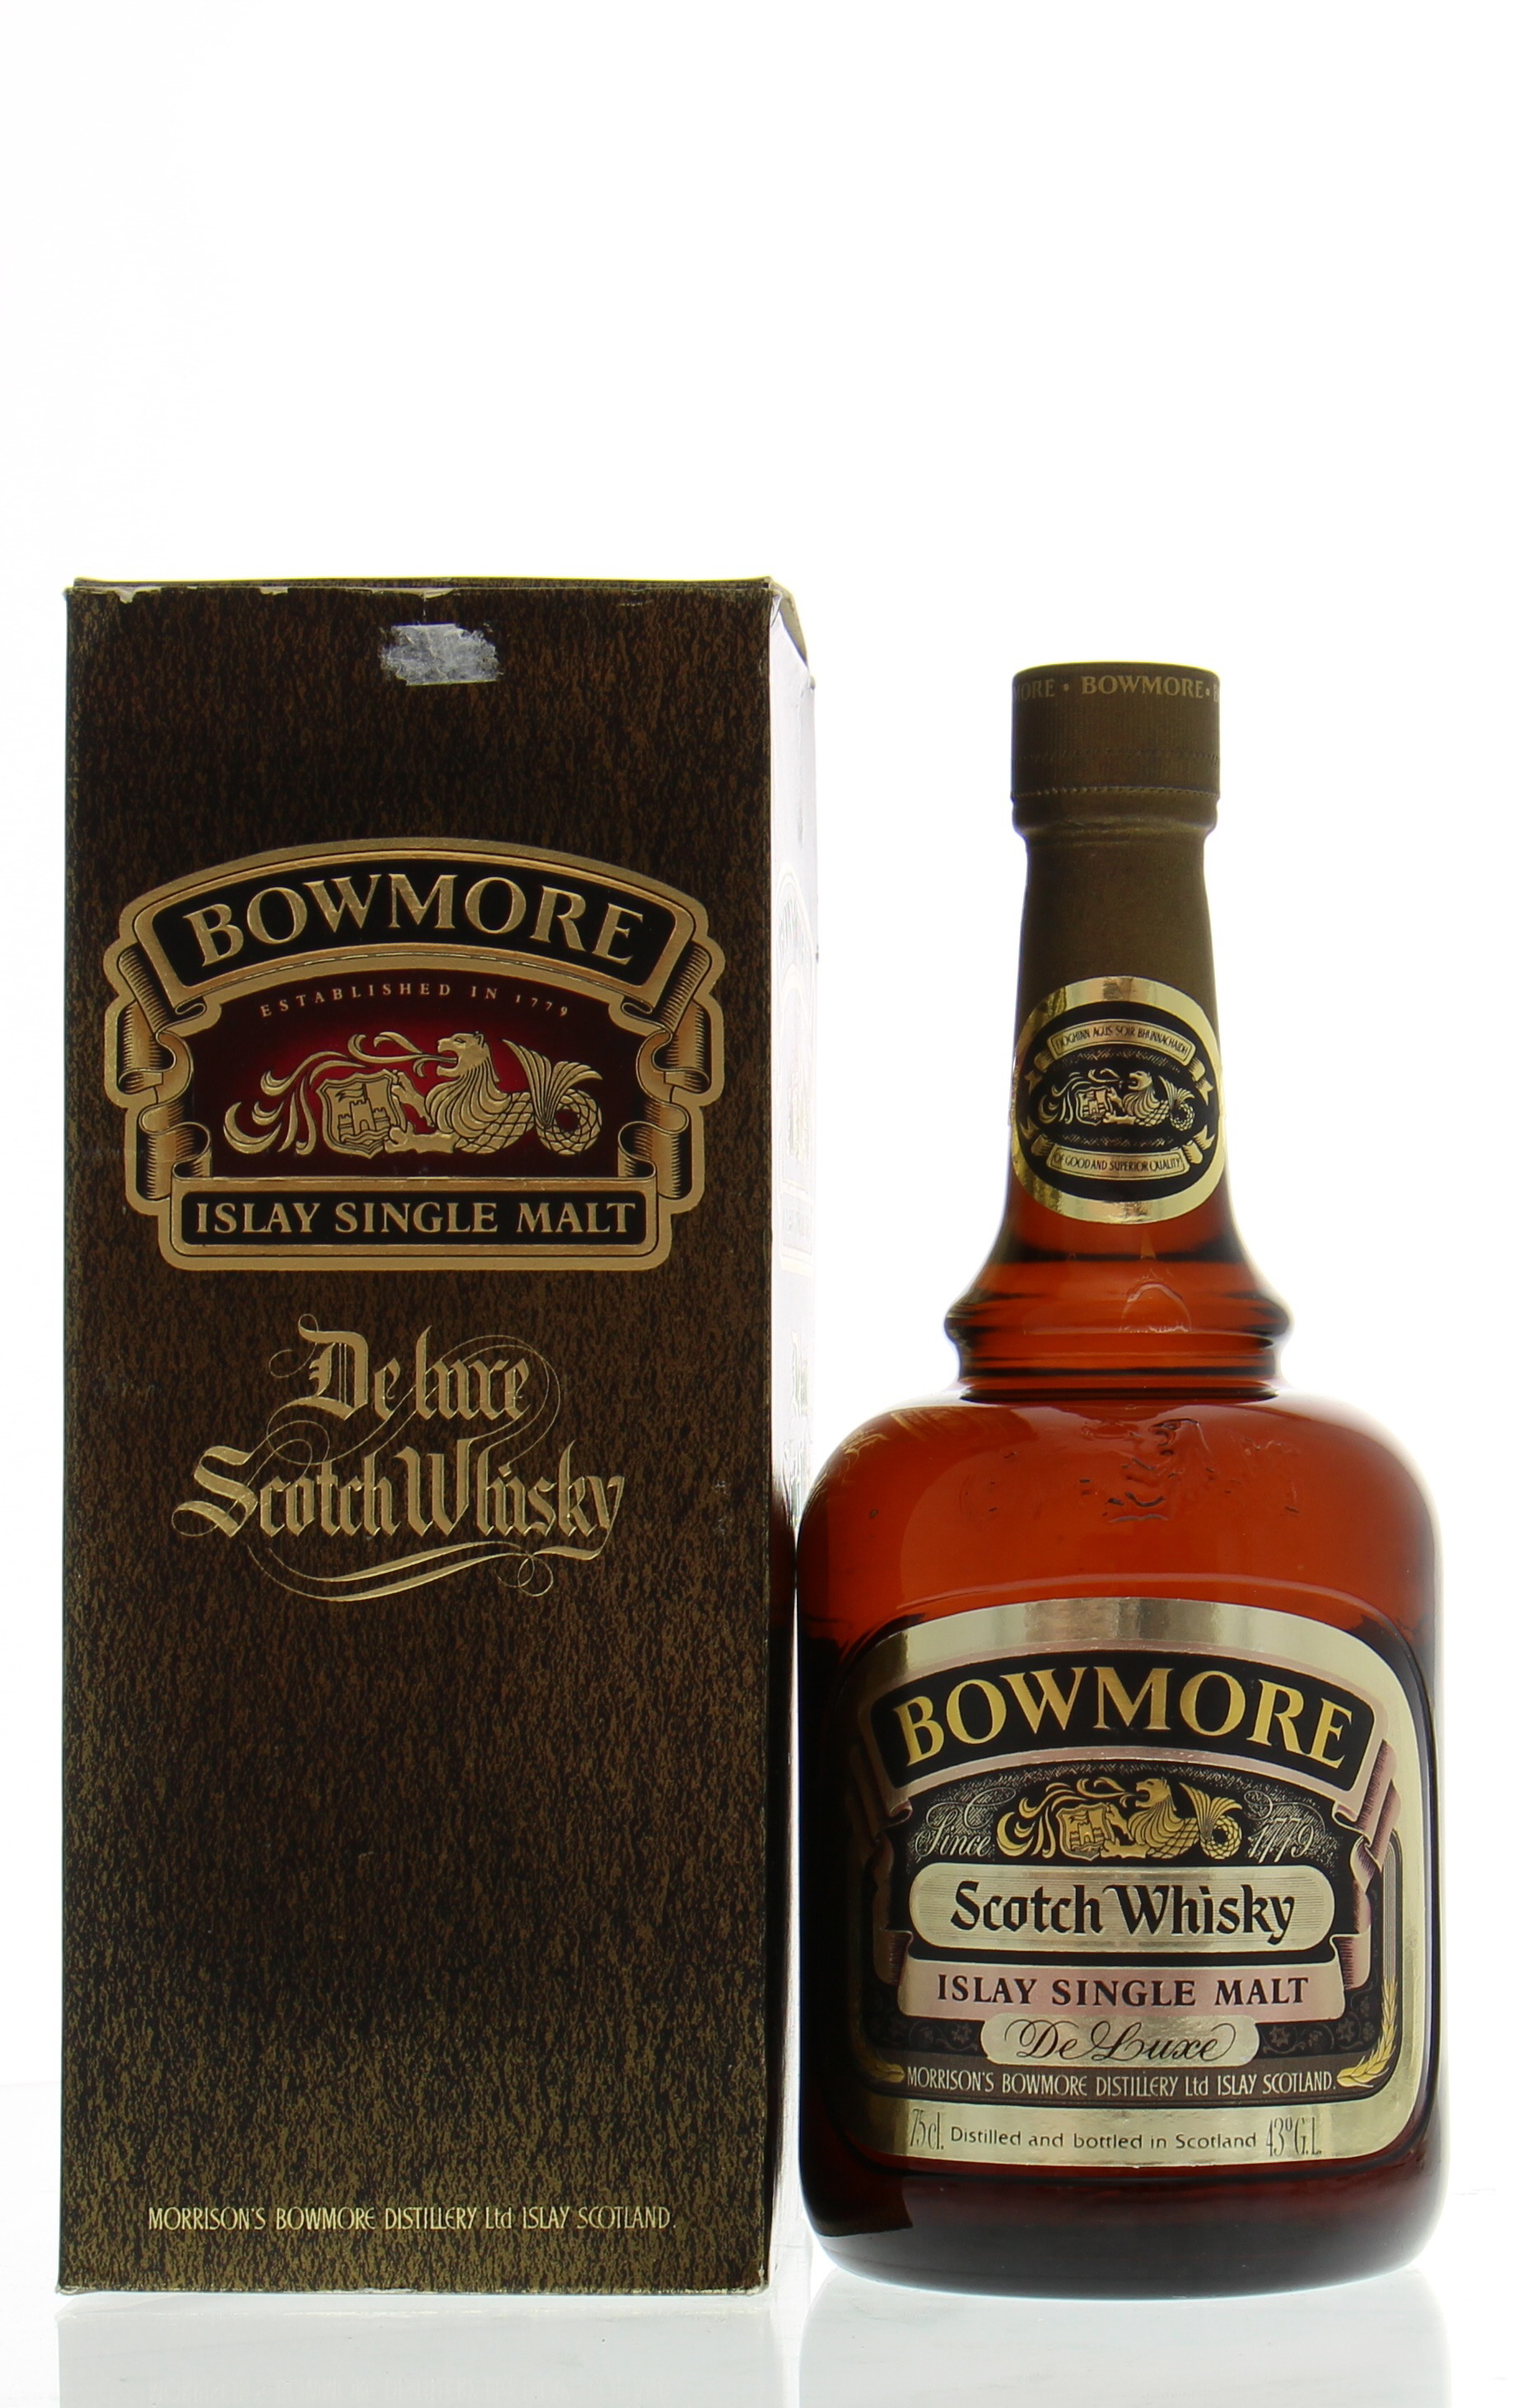 Bowmore - Bowmore De Luxe (Brown dumpy with cork stopper) 1980's 43% NV Perfect